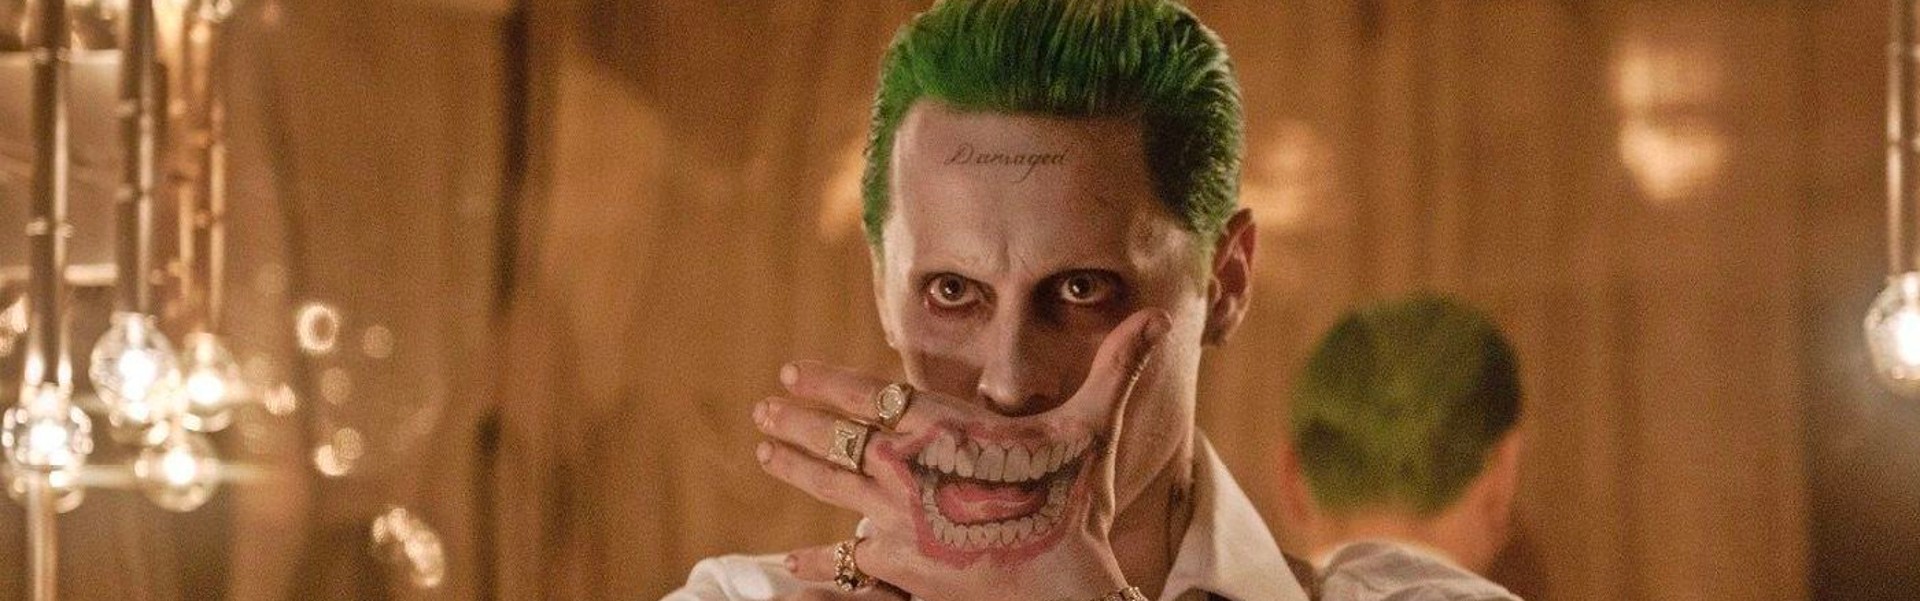 Remember Jared Leto’s Joker forehead tattoo? We know whose idea it was. David Ayer mentioned it in relation to “Suicide Squad”